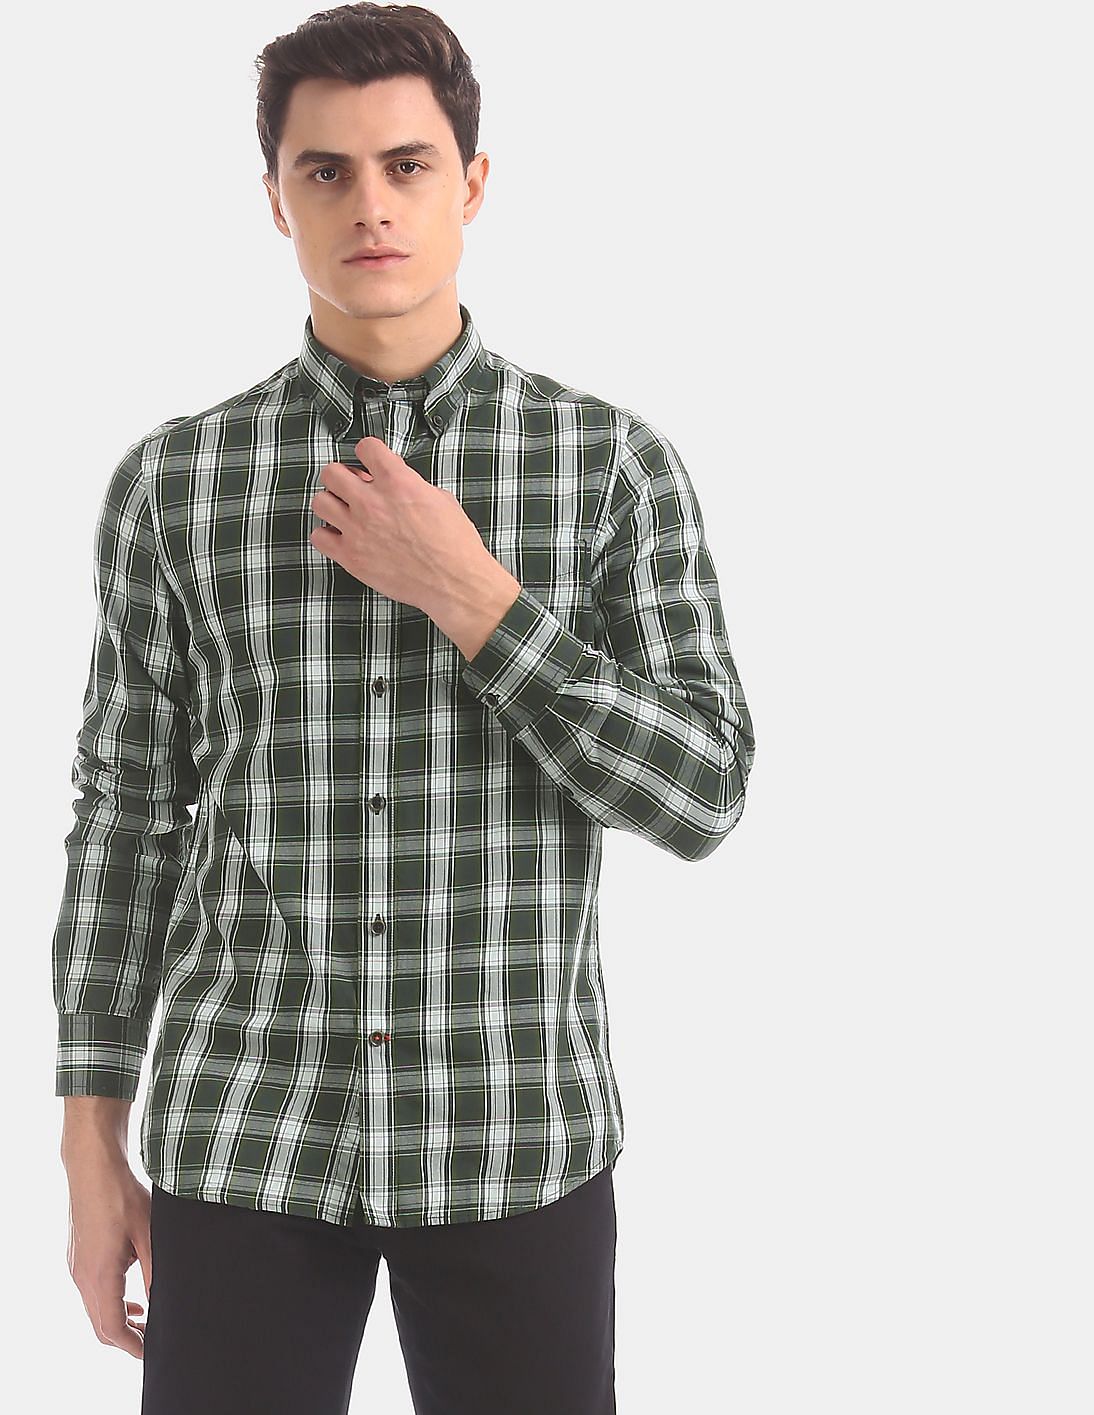 Buy Arrow Sports Men Olive Button Down Check Casual Shirt - NNNOW.com